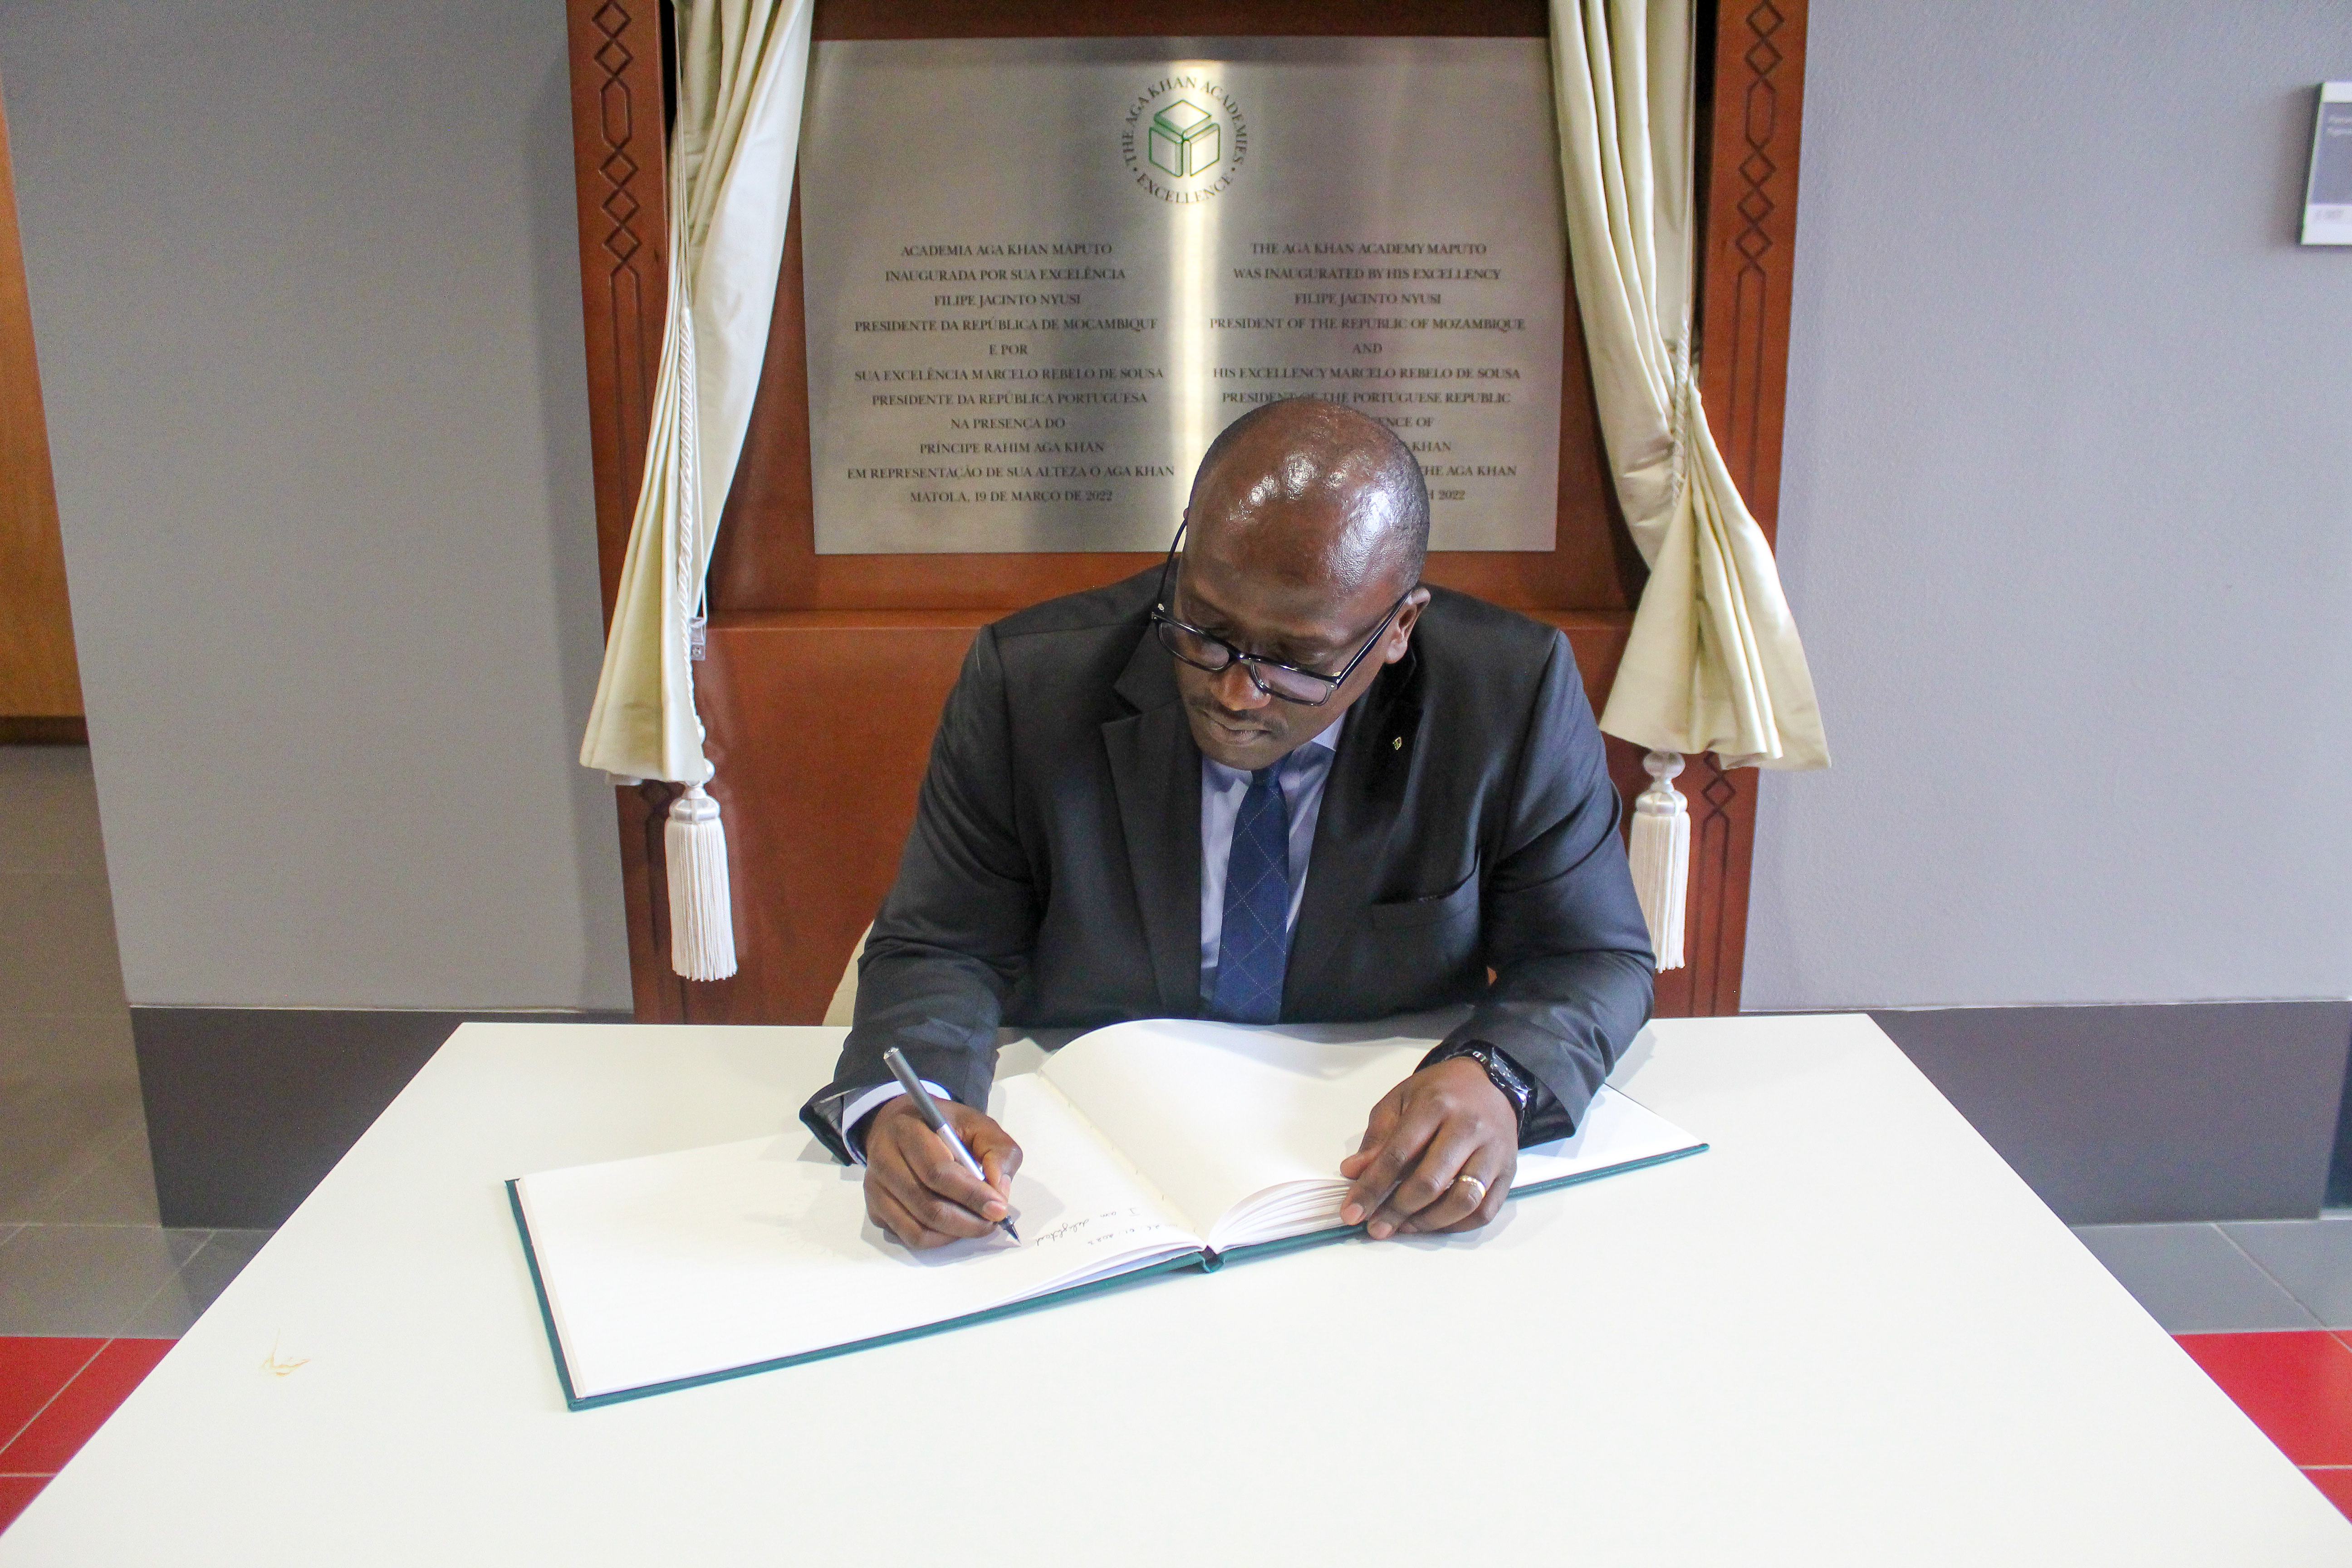 H.E. Mr Nikobisanzwe signing the Academy's guestbook